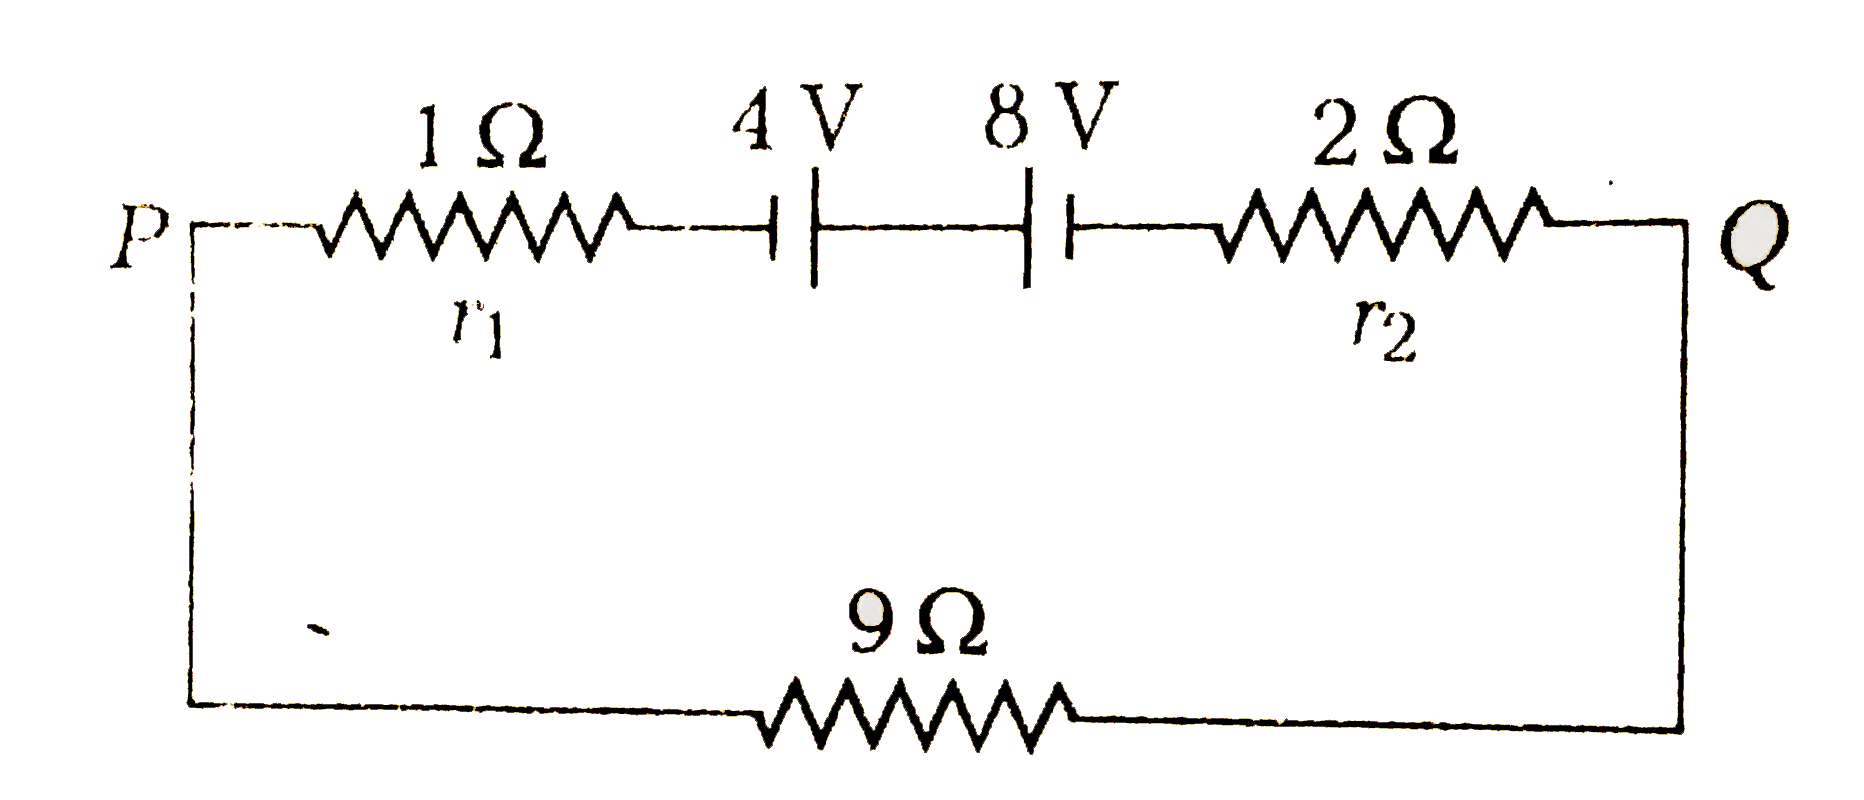 Two batteries of emf 4 V and 8 V with internal resistances 1Omega and 2Omega are connected in a circuit with a resistance of 9Omega as shown in figure. The current and potential difference between the points P and Q are